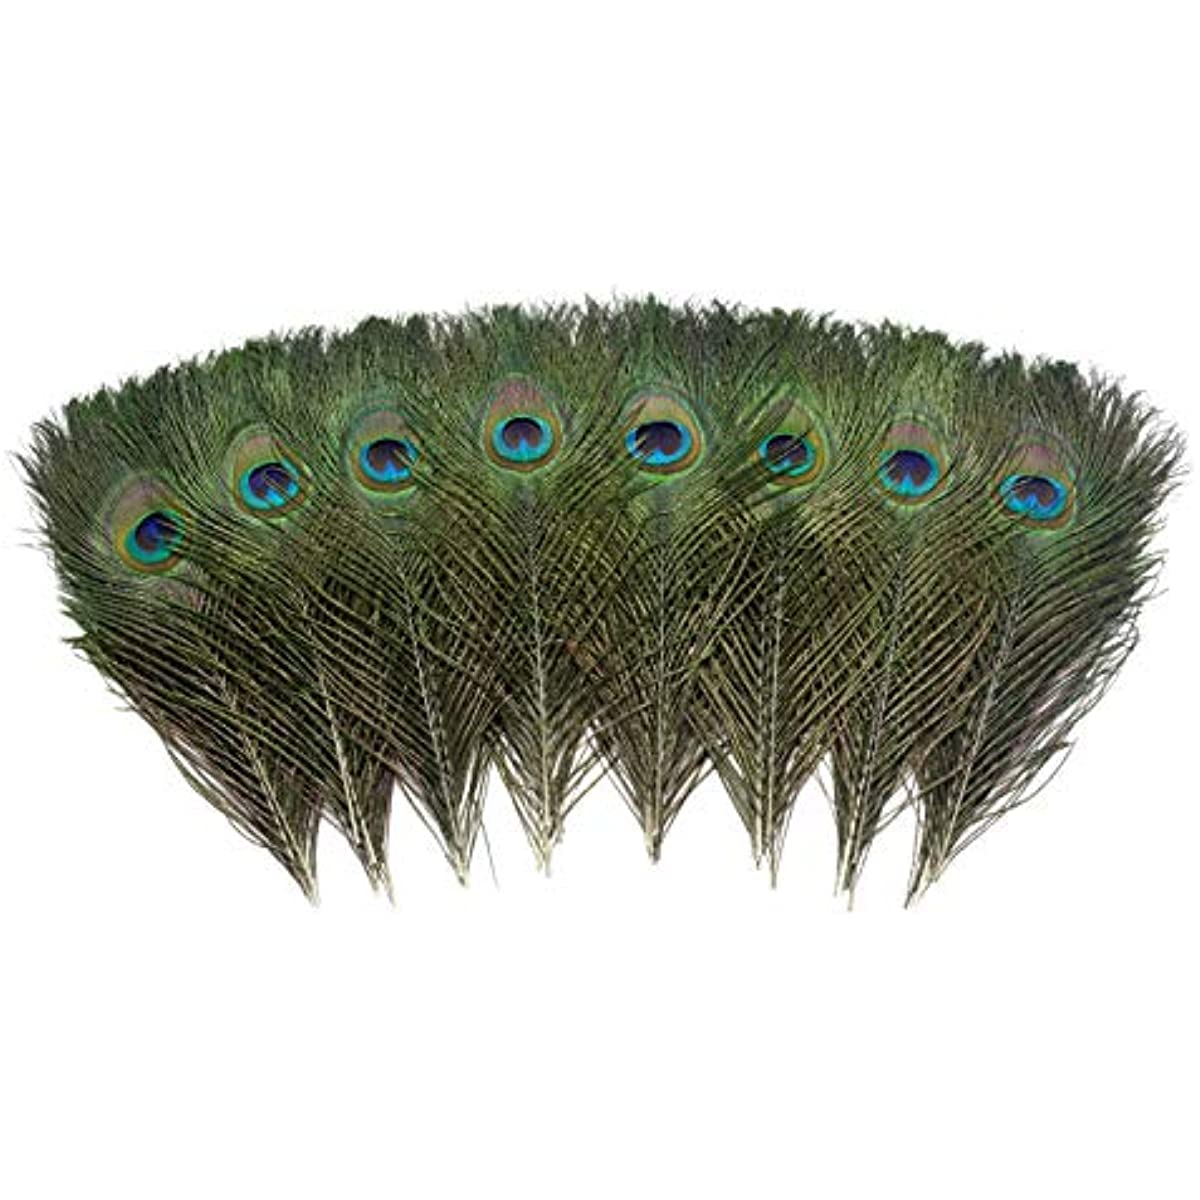 20pcs Dyed Peacock Feathers 10-12 Inch Feather for Crafts Hat Costume  Christmas Tree Decor Wedding Holiday Decoration Floral Arrangements  (Turquoise)